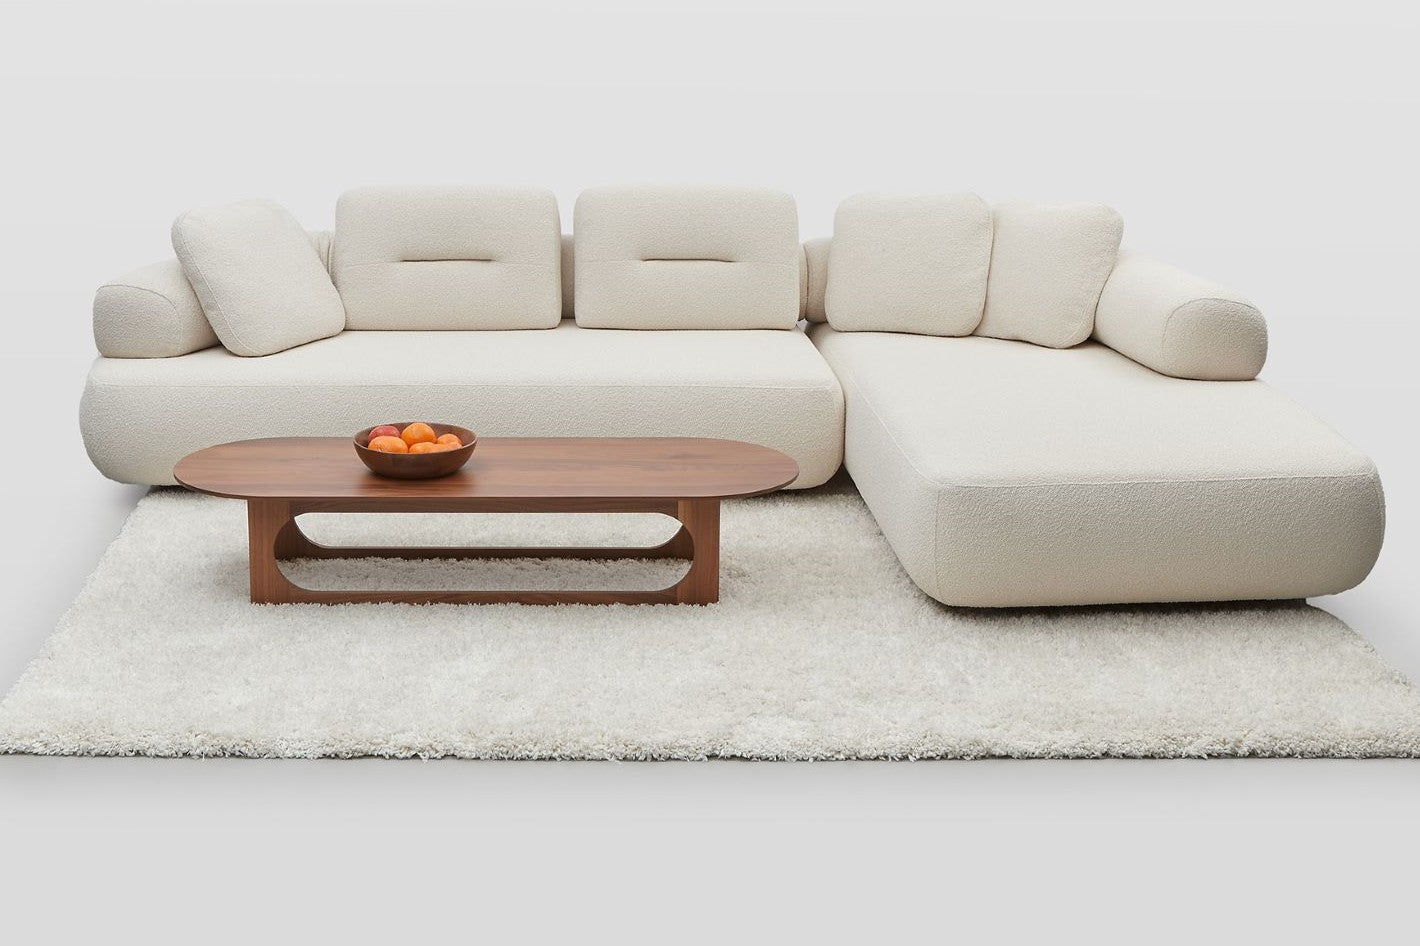 Newman L-shaped sofa and chaise set in white boucle with Ethos table and bowl of oranges on a white rug.